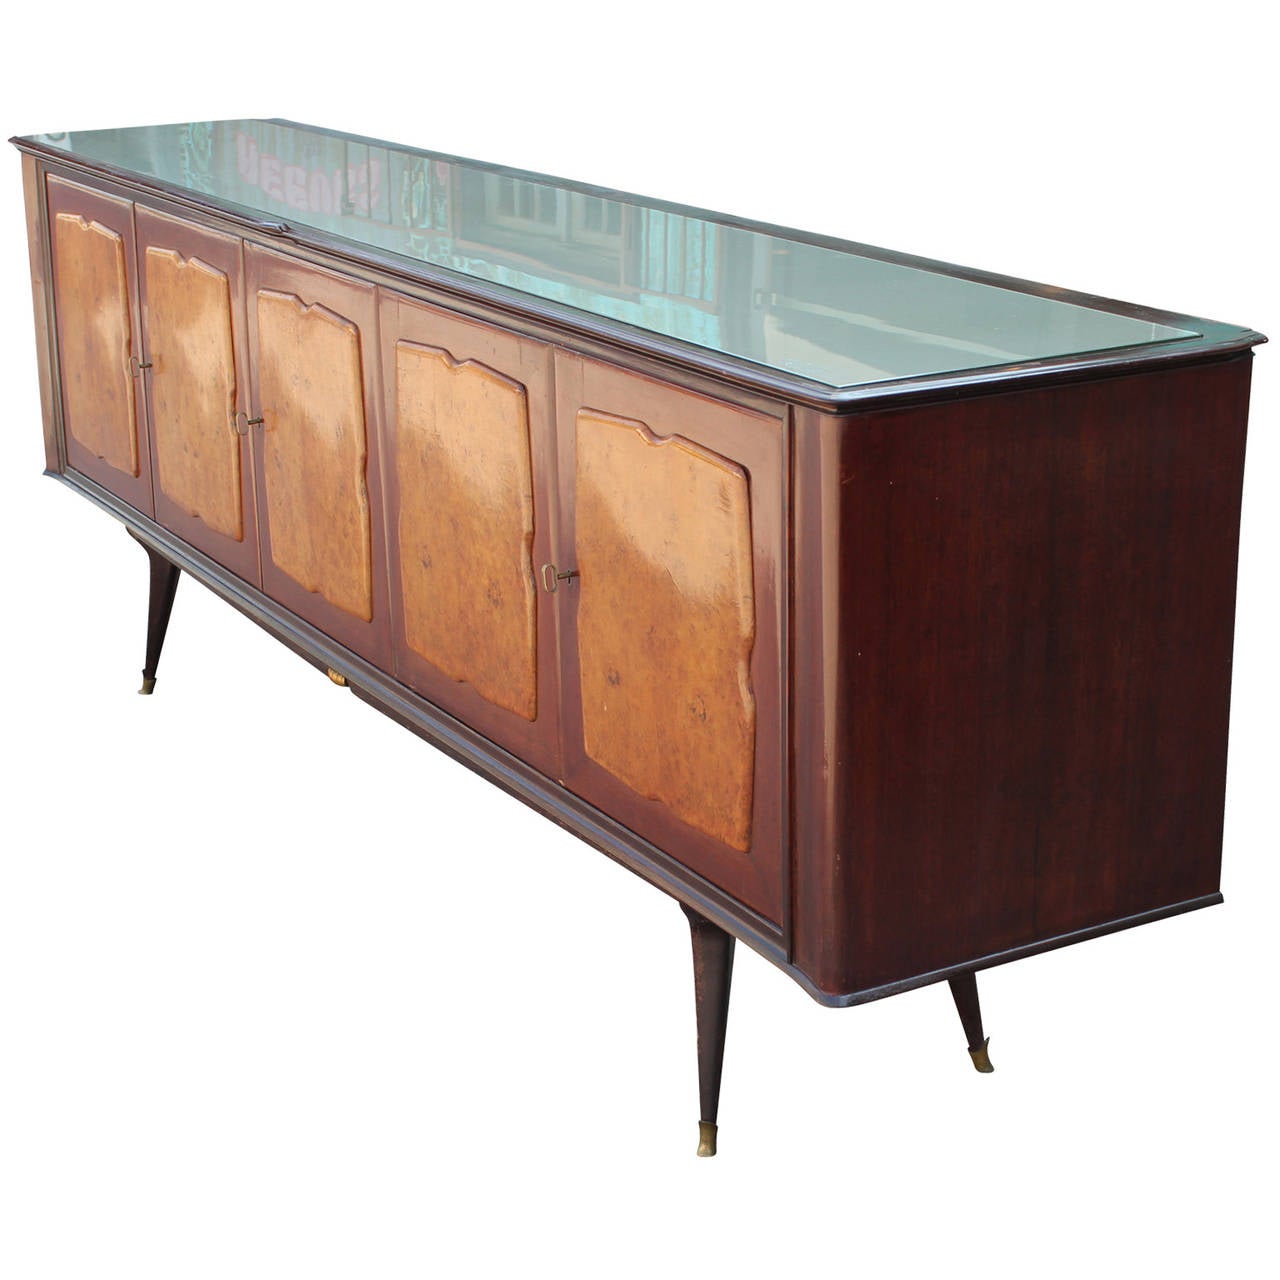 Excellent sideboard or credenza made in Italy with burl wood front and a silver glass top. The sideboard sits atop a sculptural base with brass tipped feet. It was made in the mid-1950s. The sideboard reflects the style of Paolo Buffa. Each door has